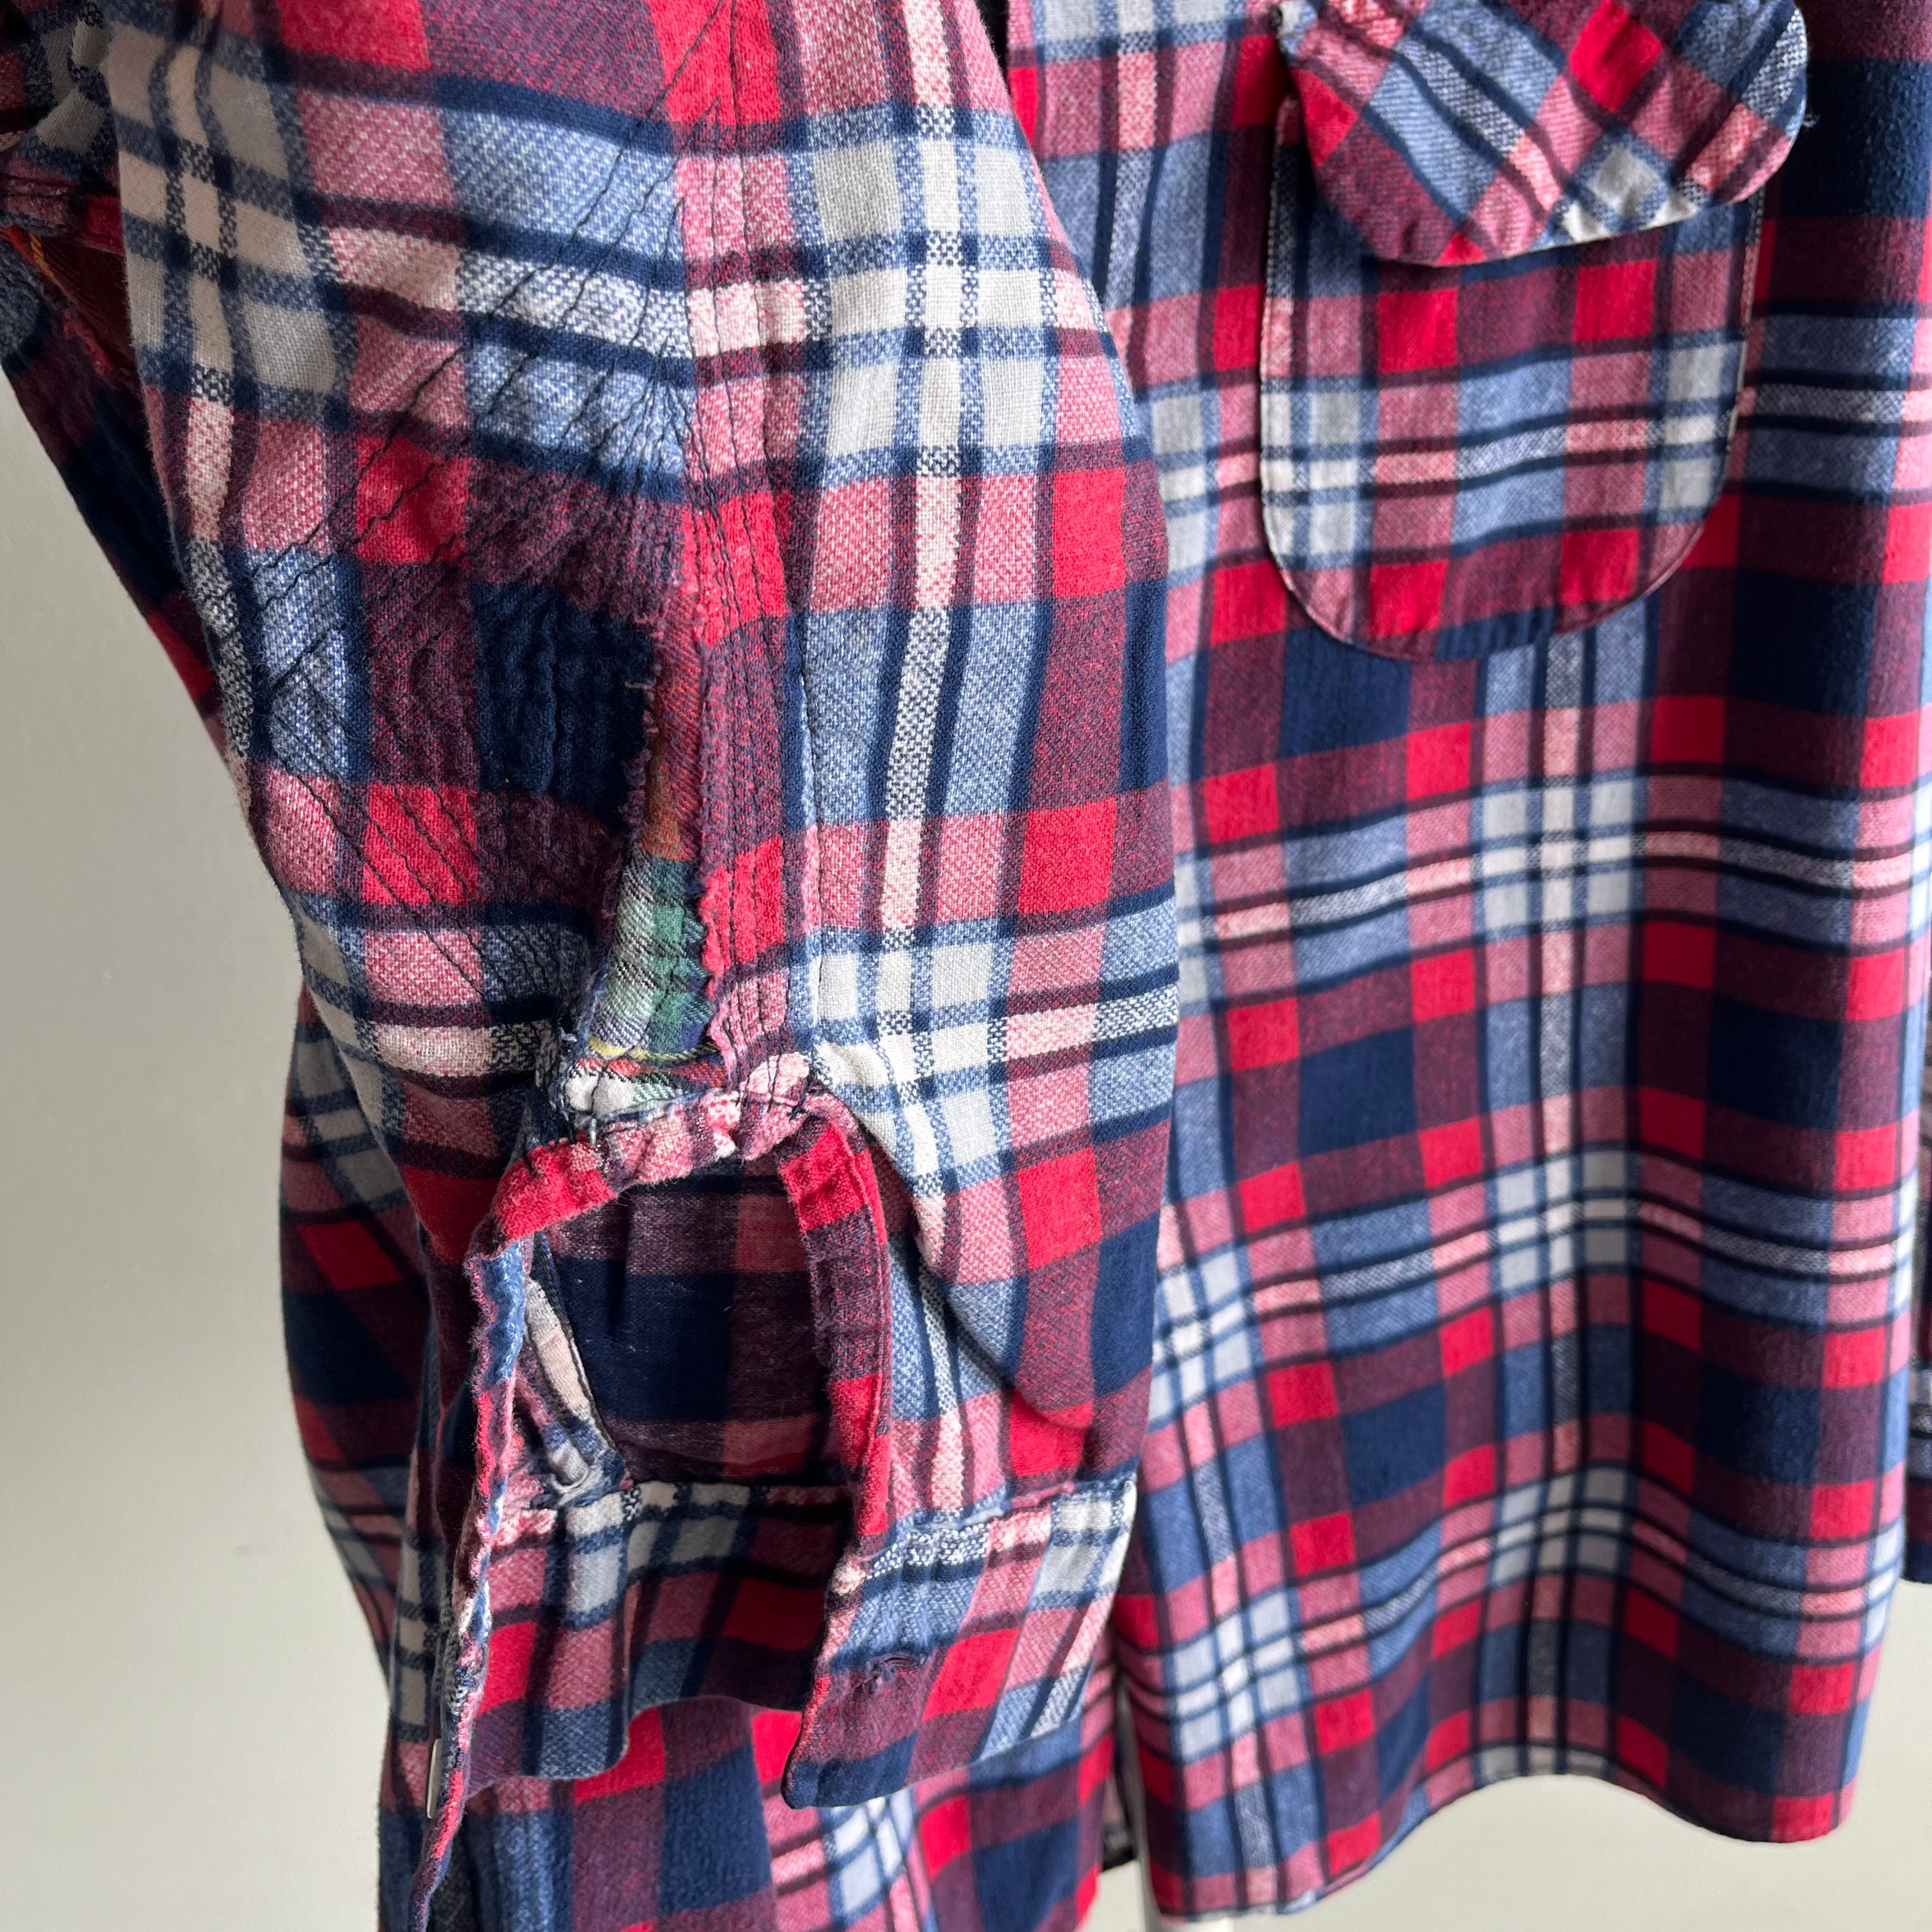 1970/80s Epically Mended Soft and Thin Cotton Flannel